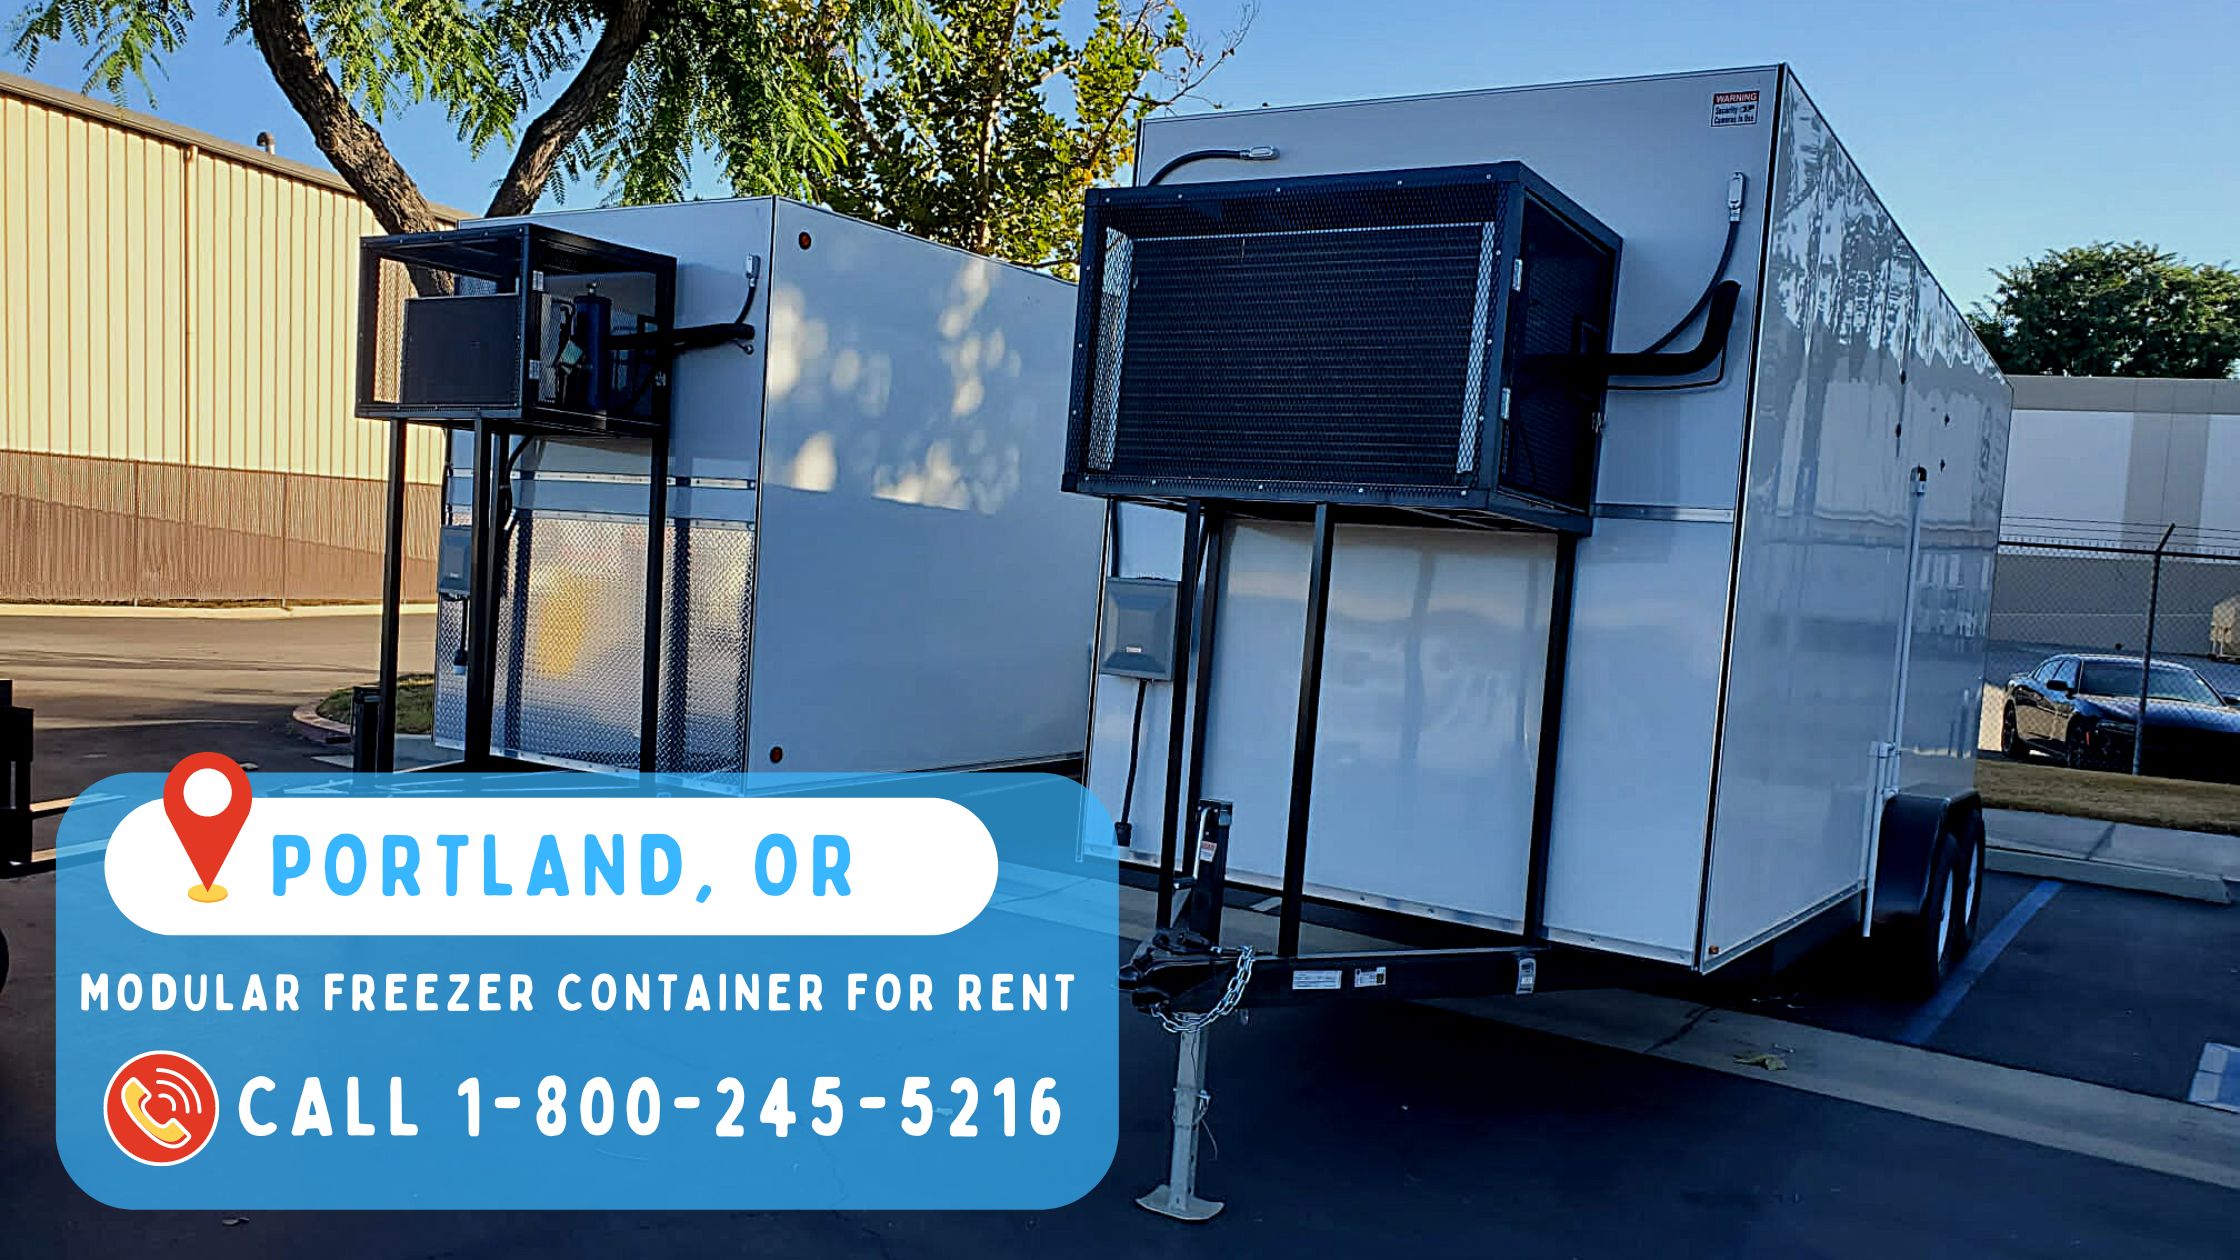 Modular Freezer Container for Rent in Portland